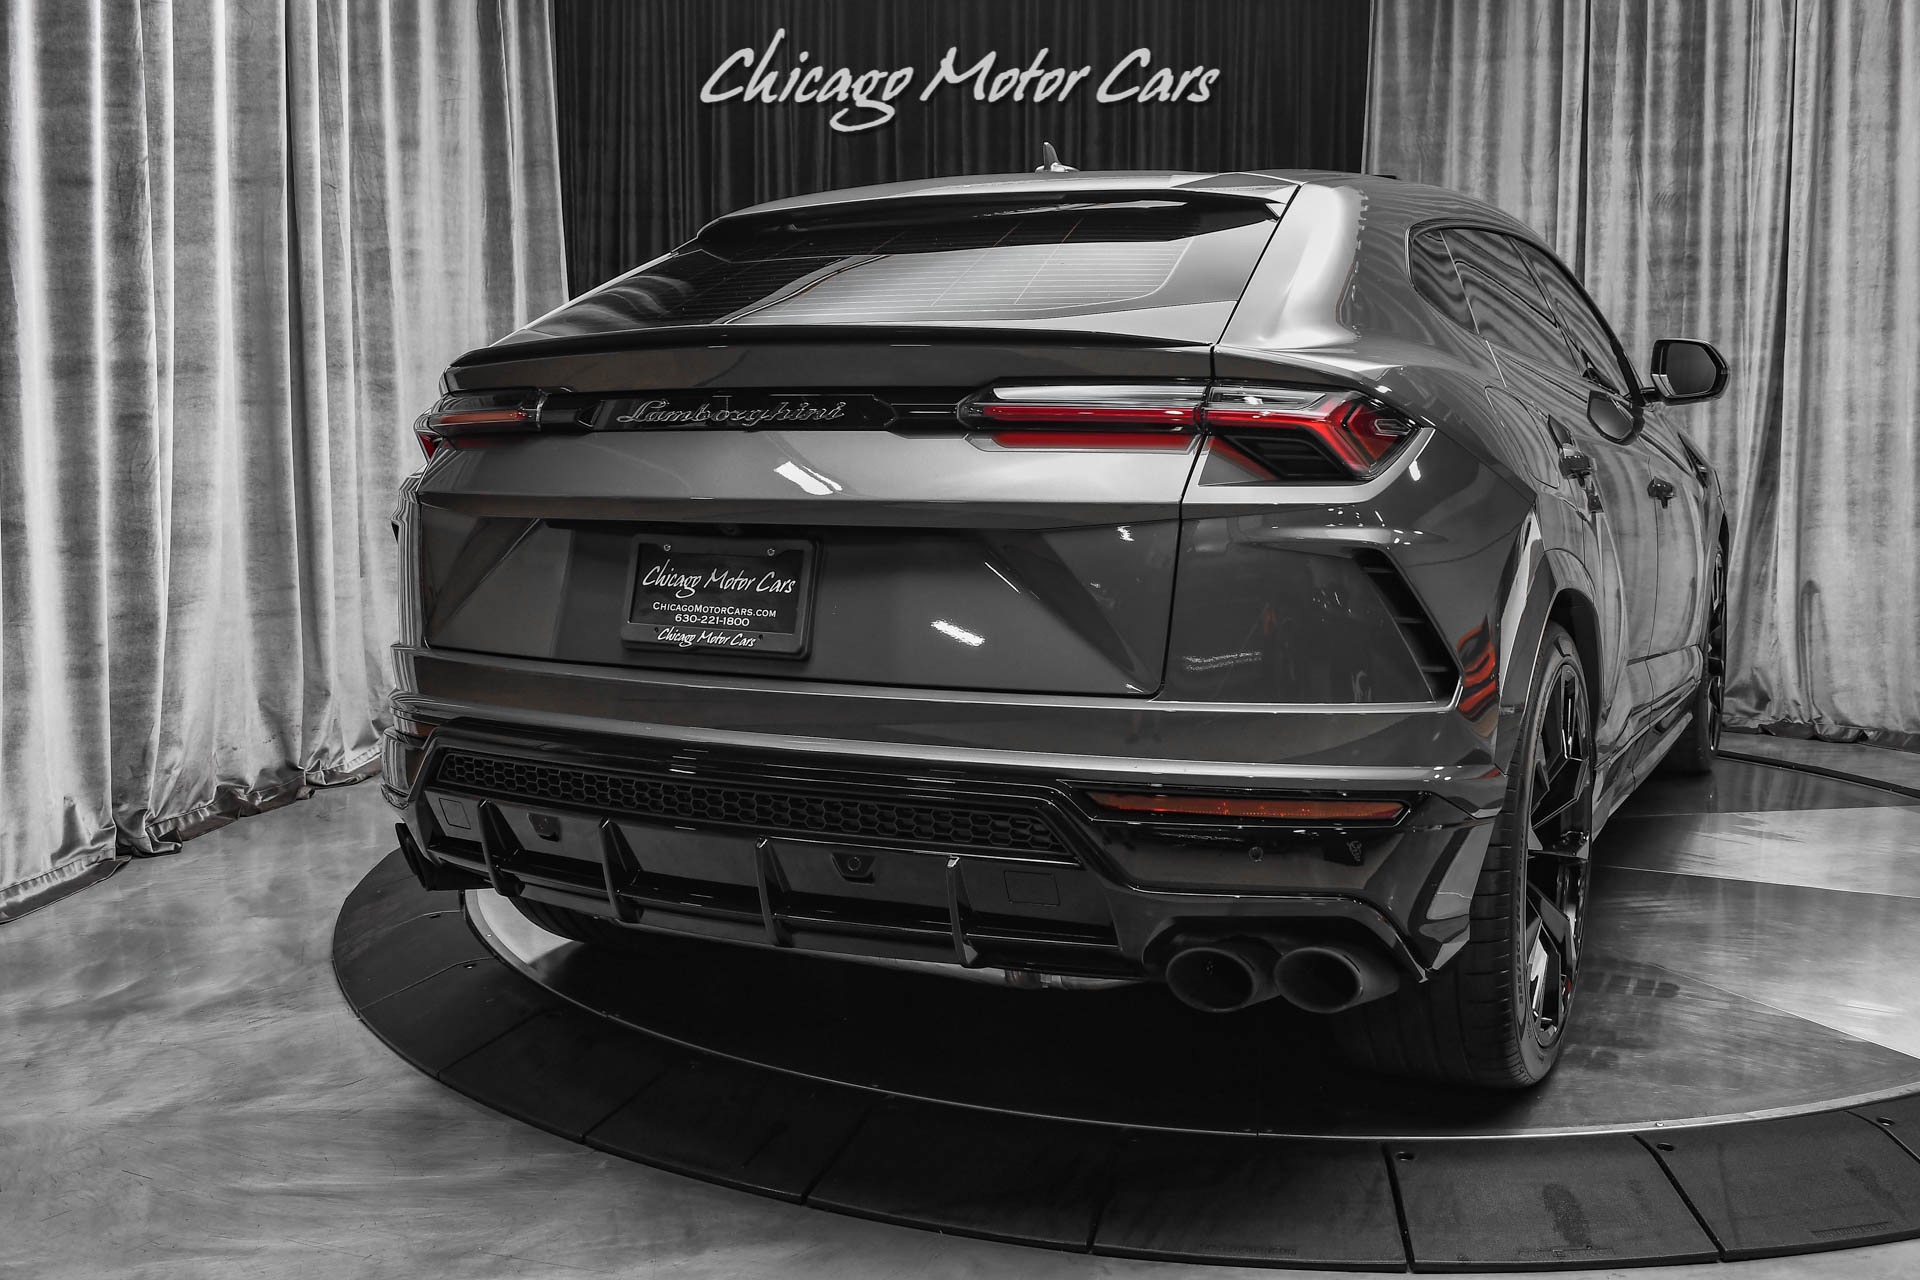 Used 2021 Lamborghini Urus Taigete 23s Hard Loaded! B&O Advanced 3D Audio  System! For Sale (Special Pricing) | Chicago Motor Cars Stock #18601